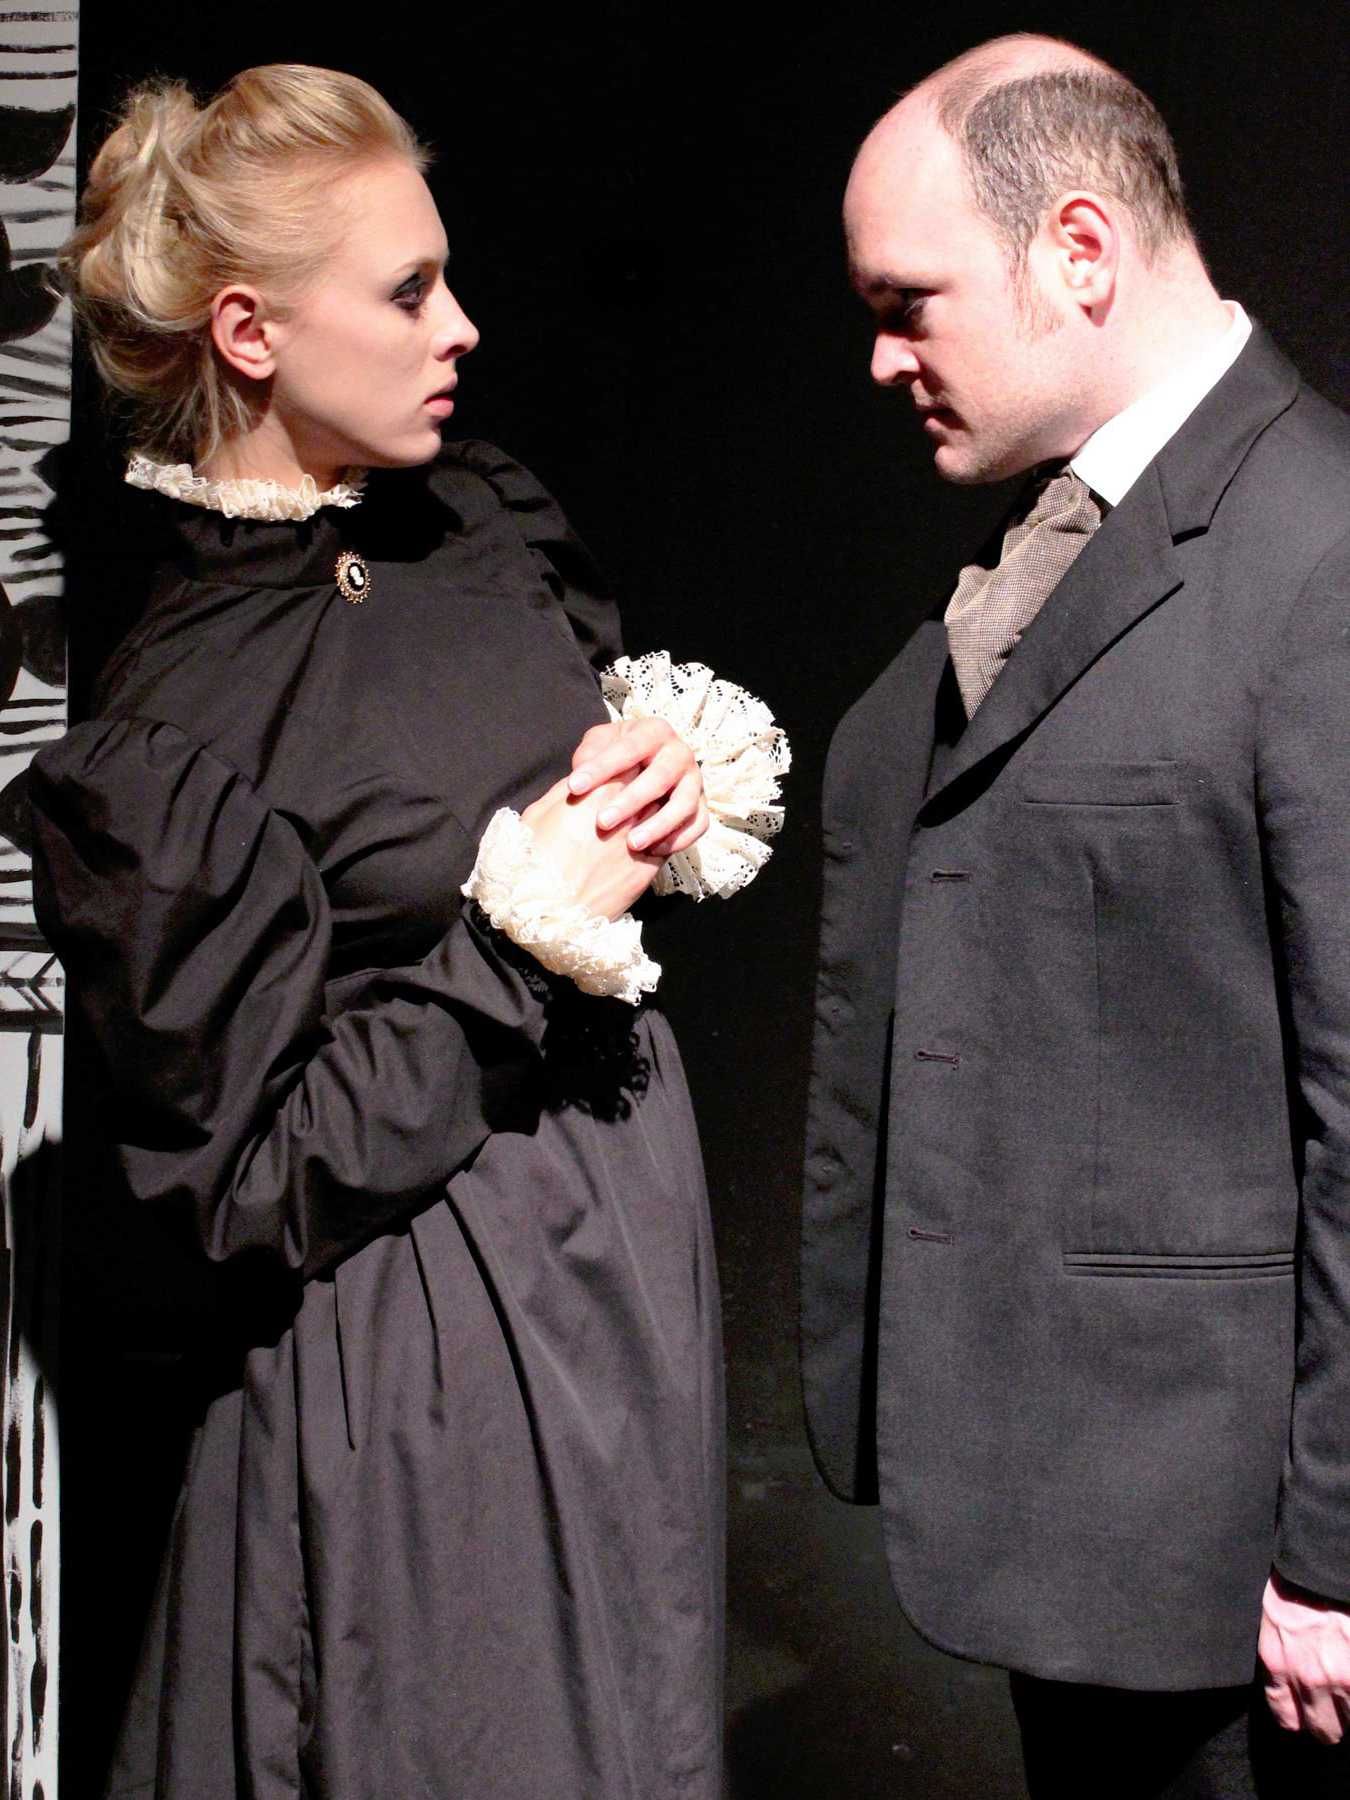 Amelia Gotham and Nich Kauffman in Henry James Turn of the Screw